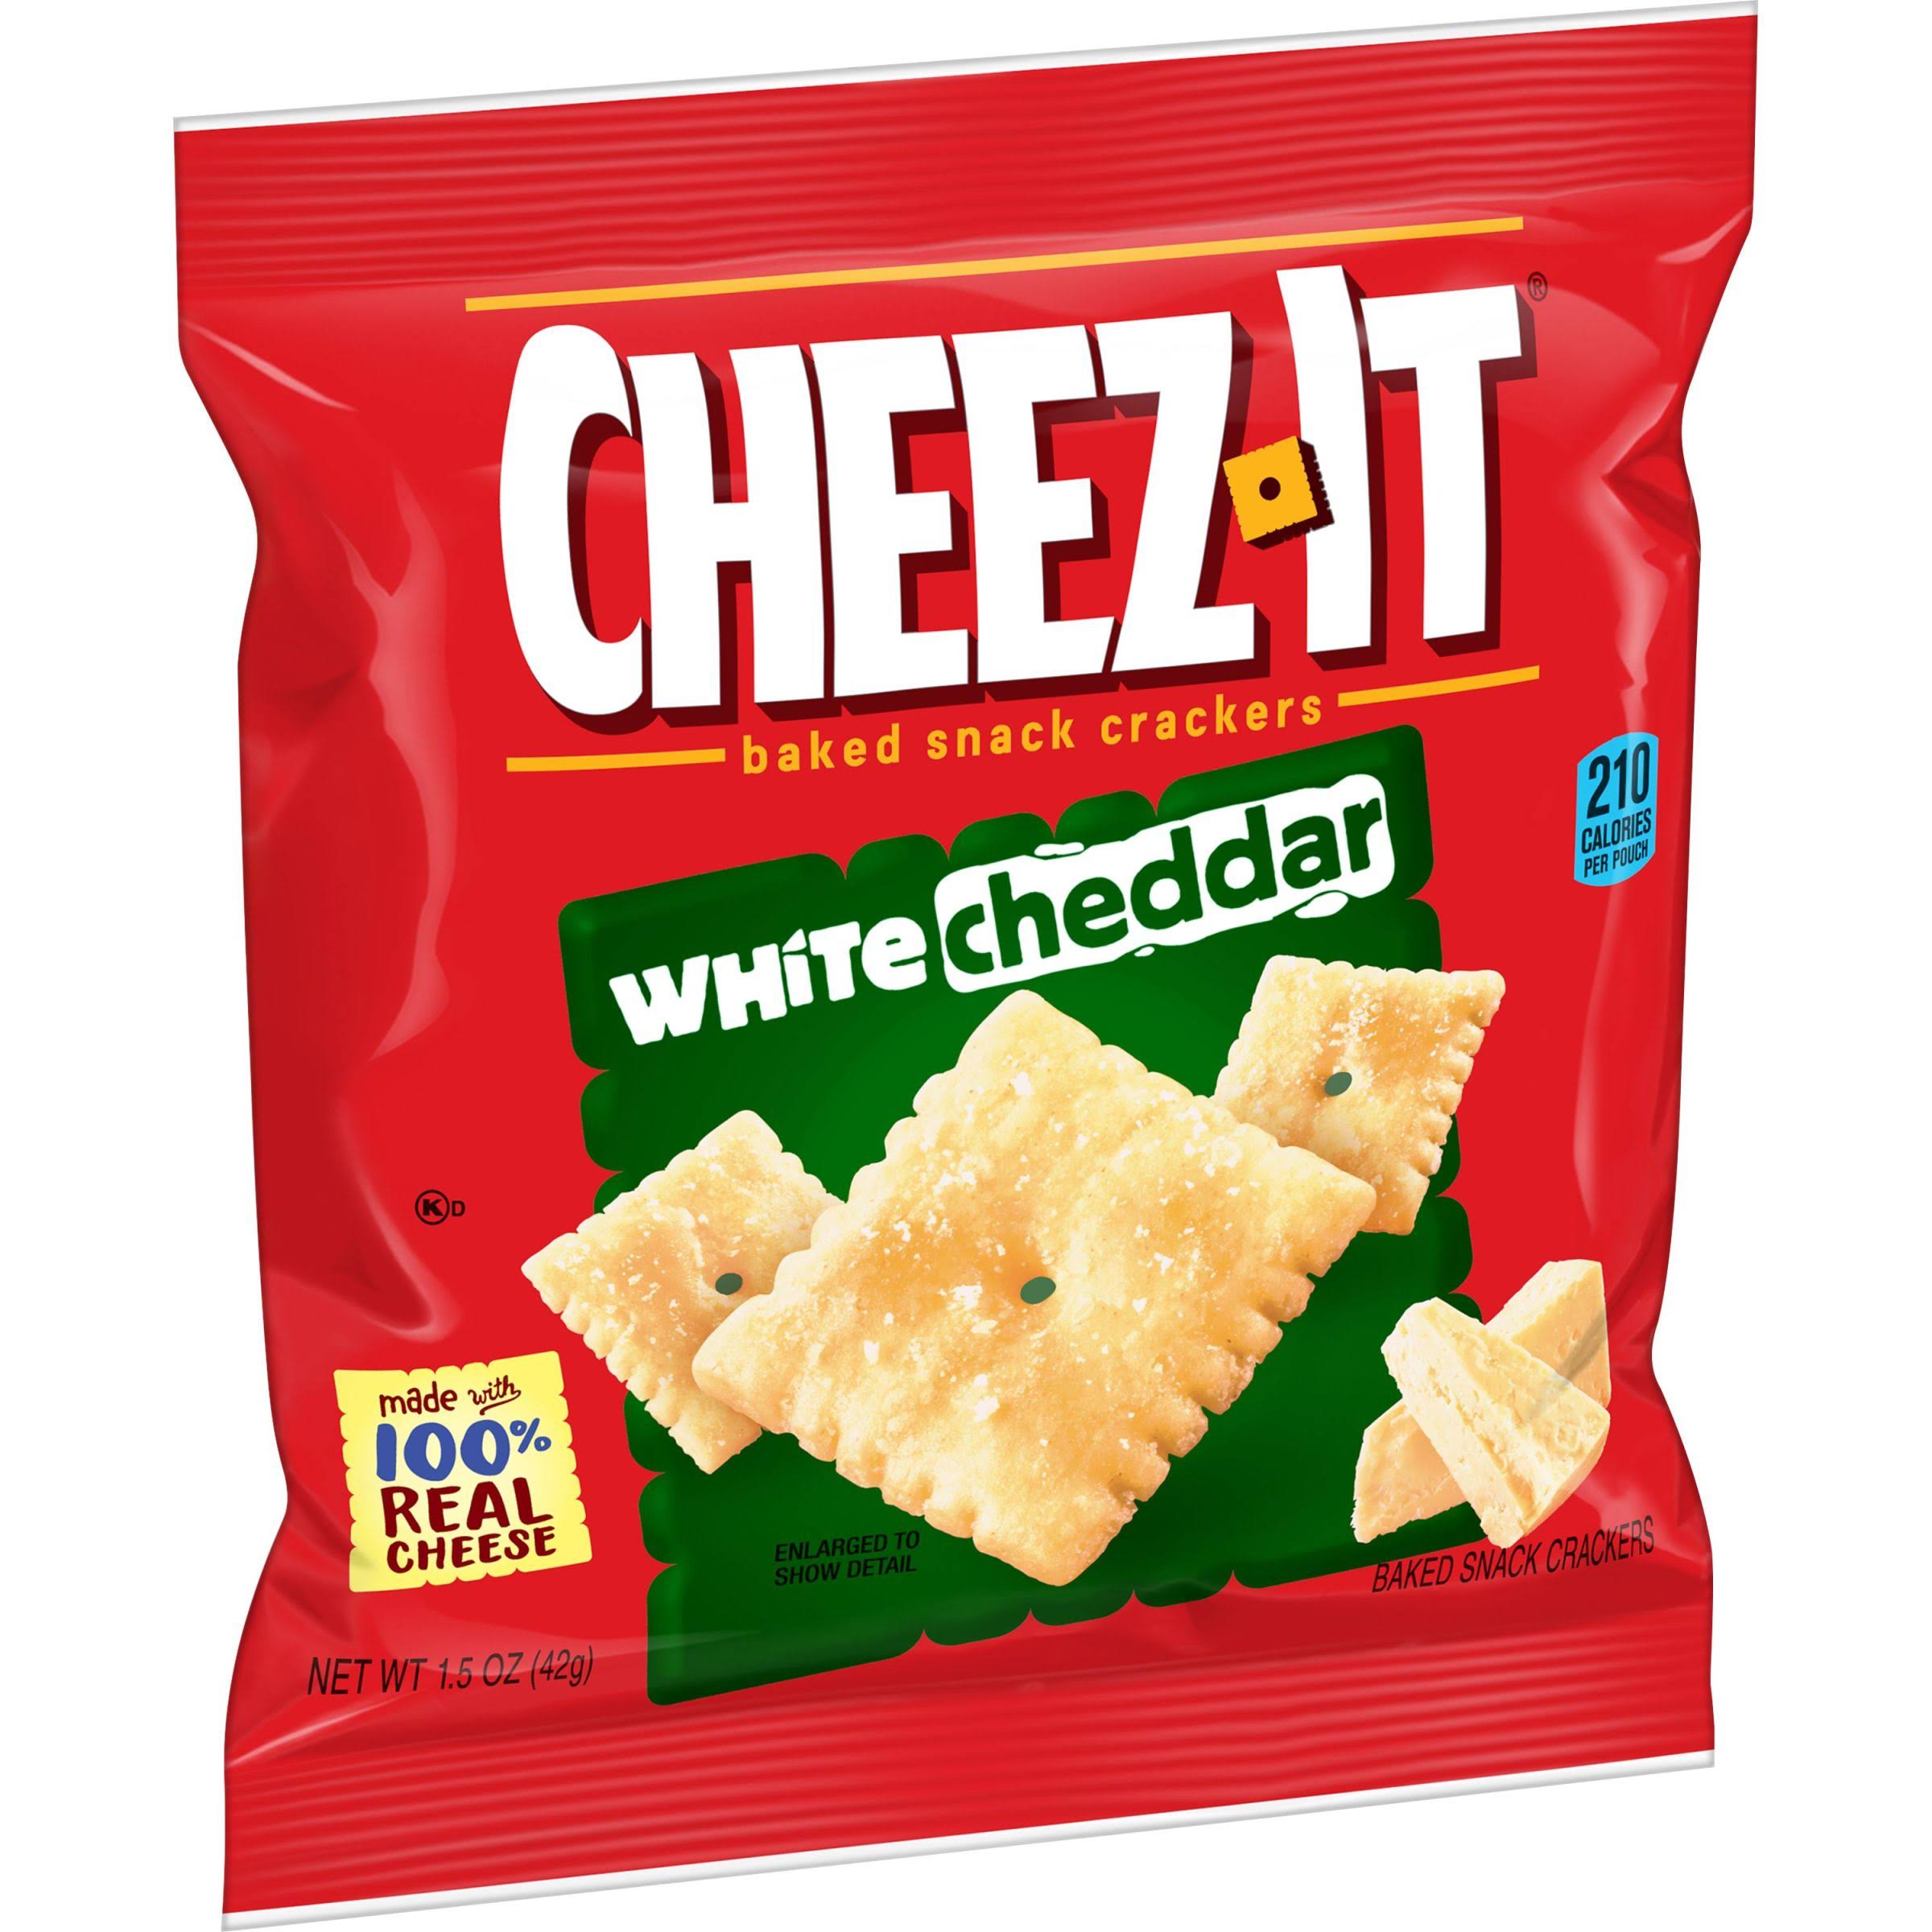 Cheez-it Baked Snack Crackers - White Cheddar